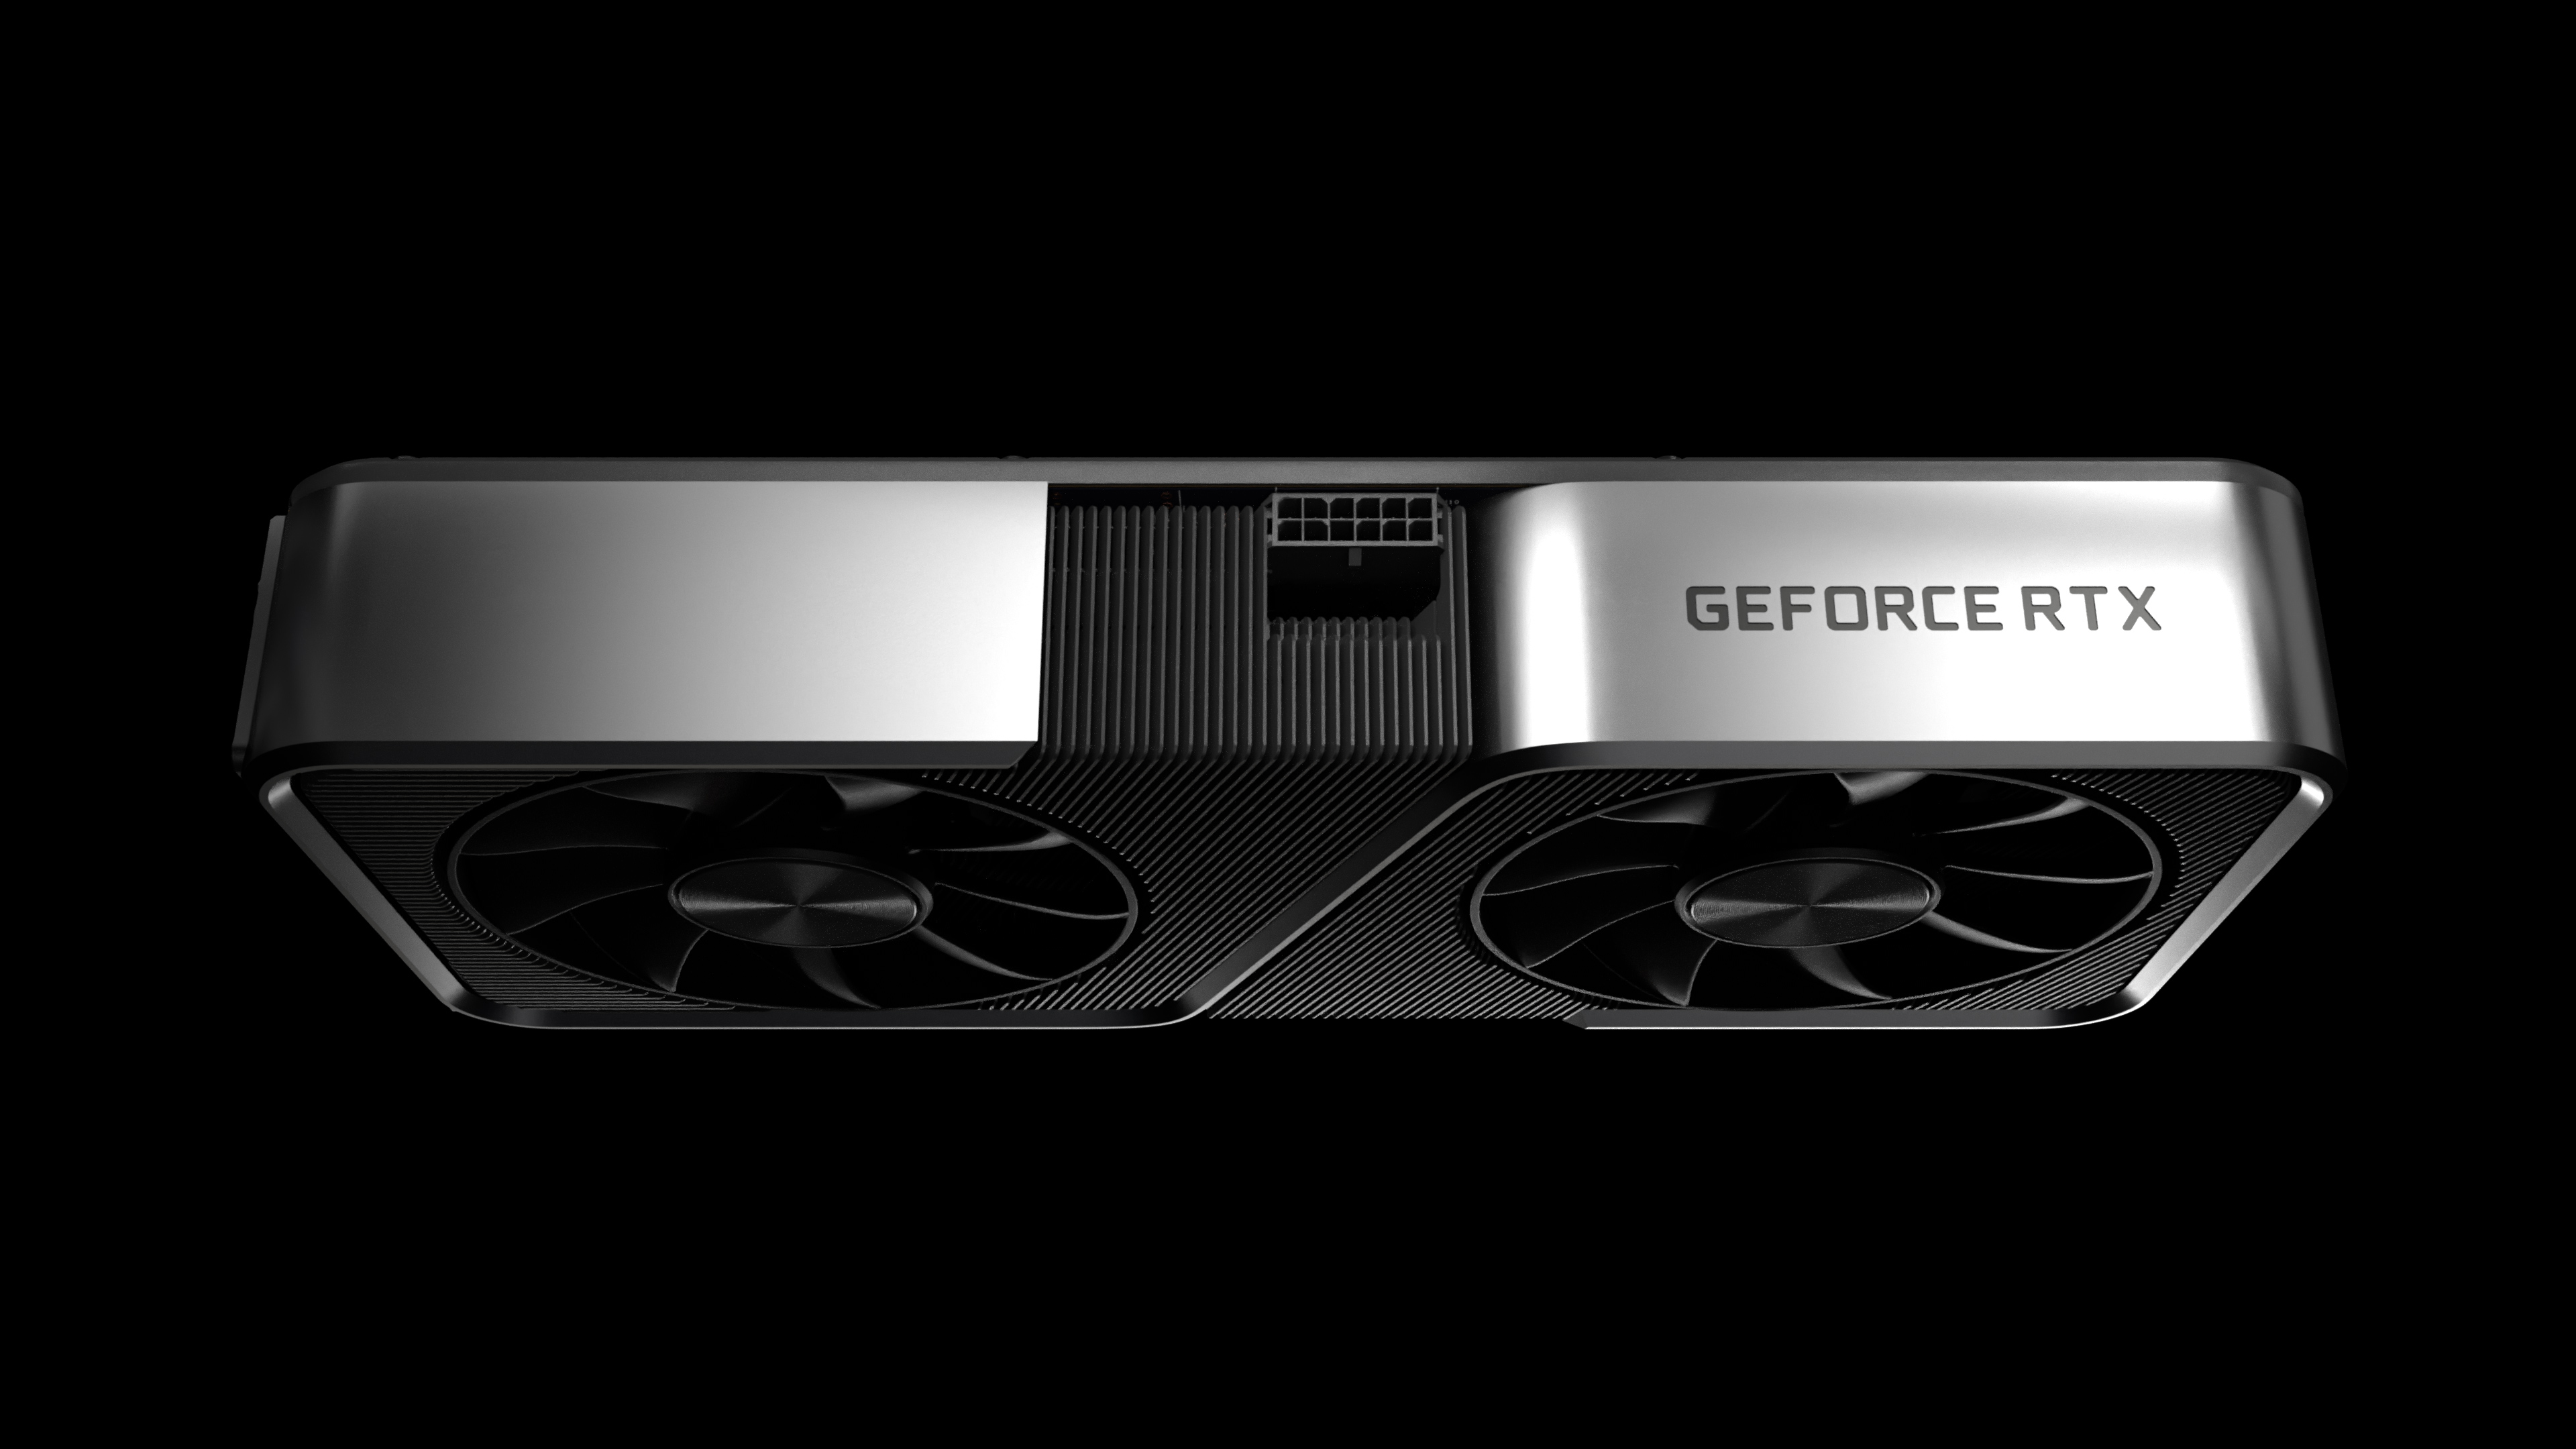 NVIDIA GeForce RTX 3070 mod confirms that there was a 16 GB VRAM 